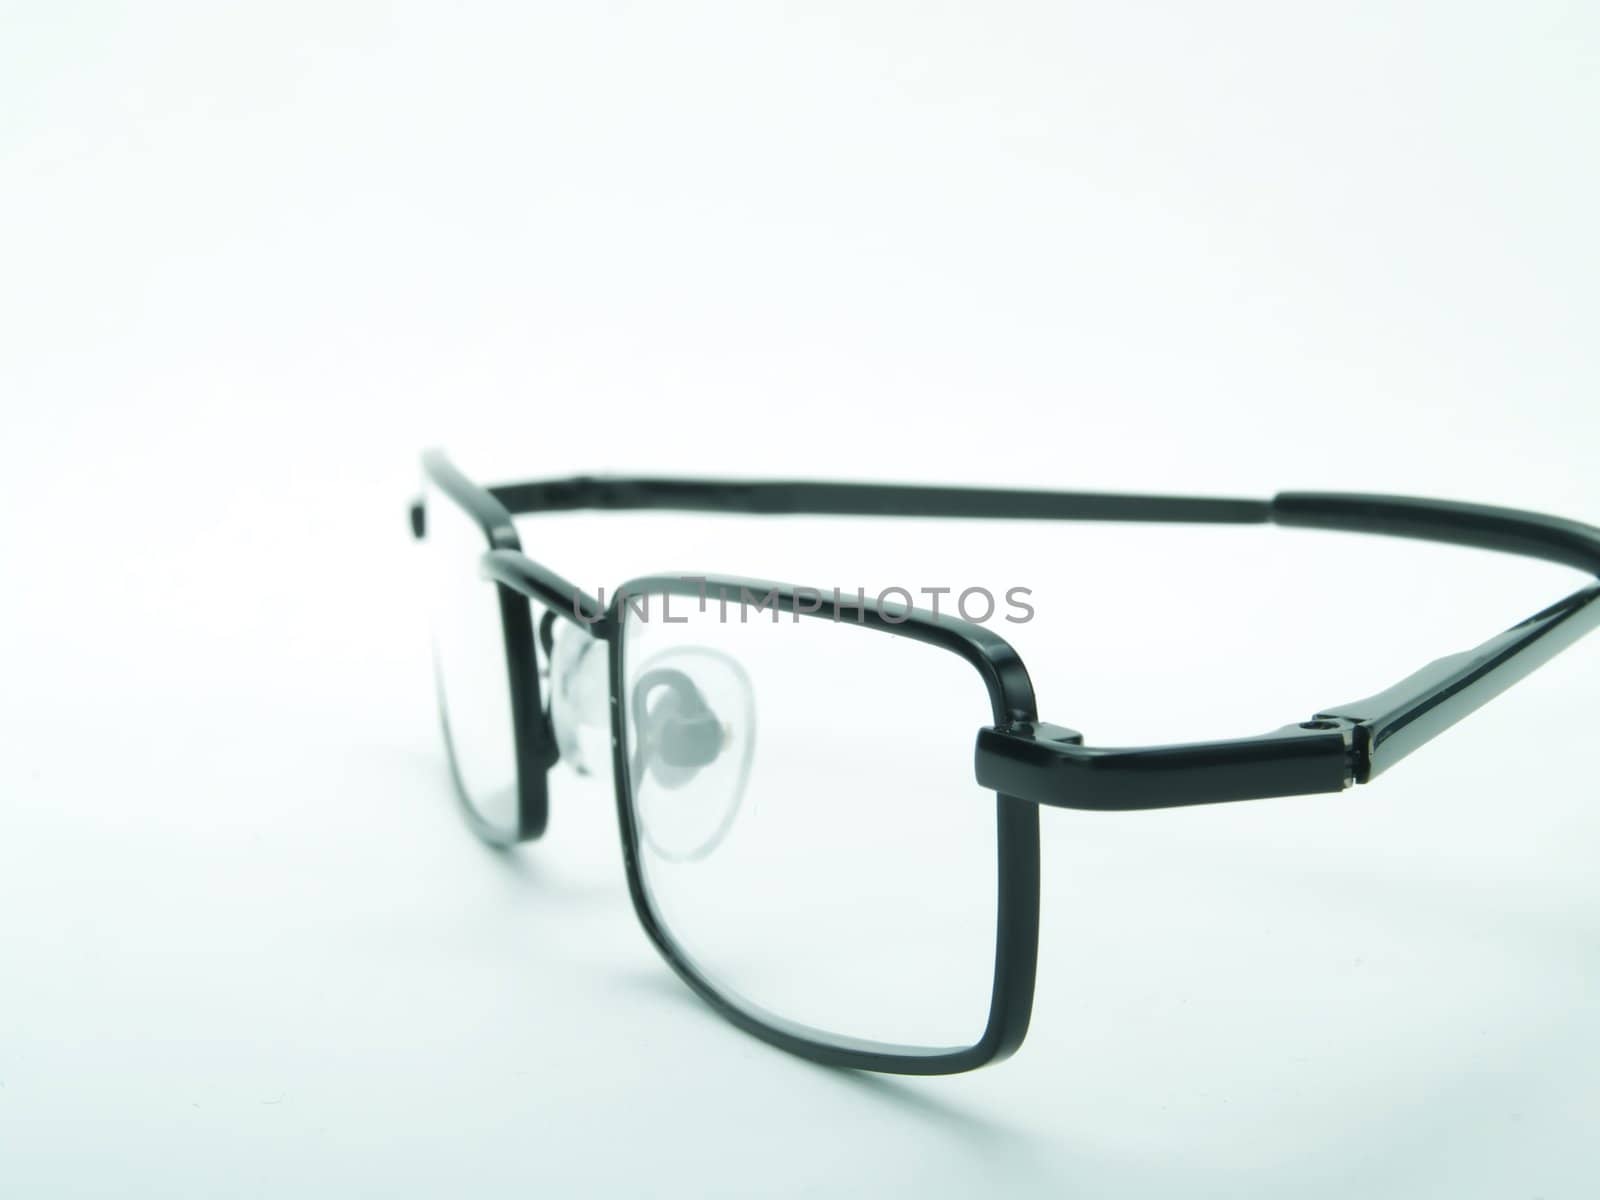 Spectacles on a white background